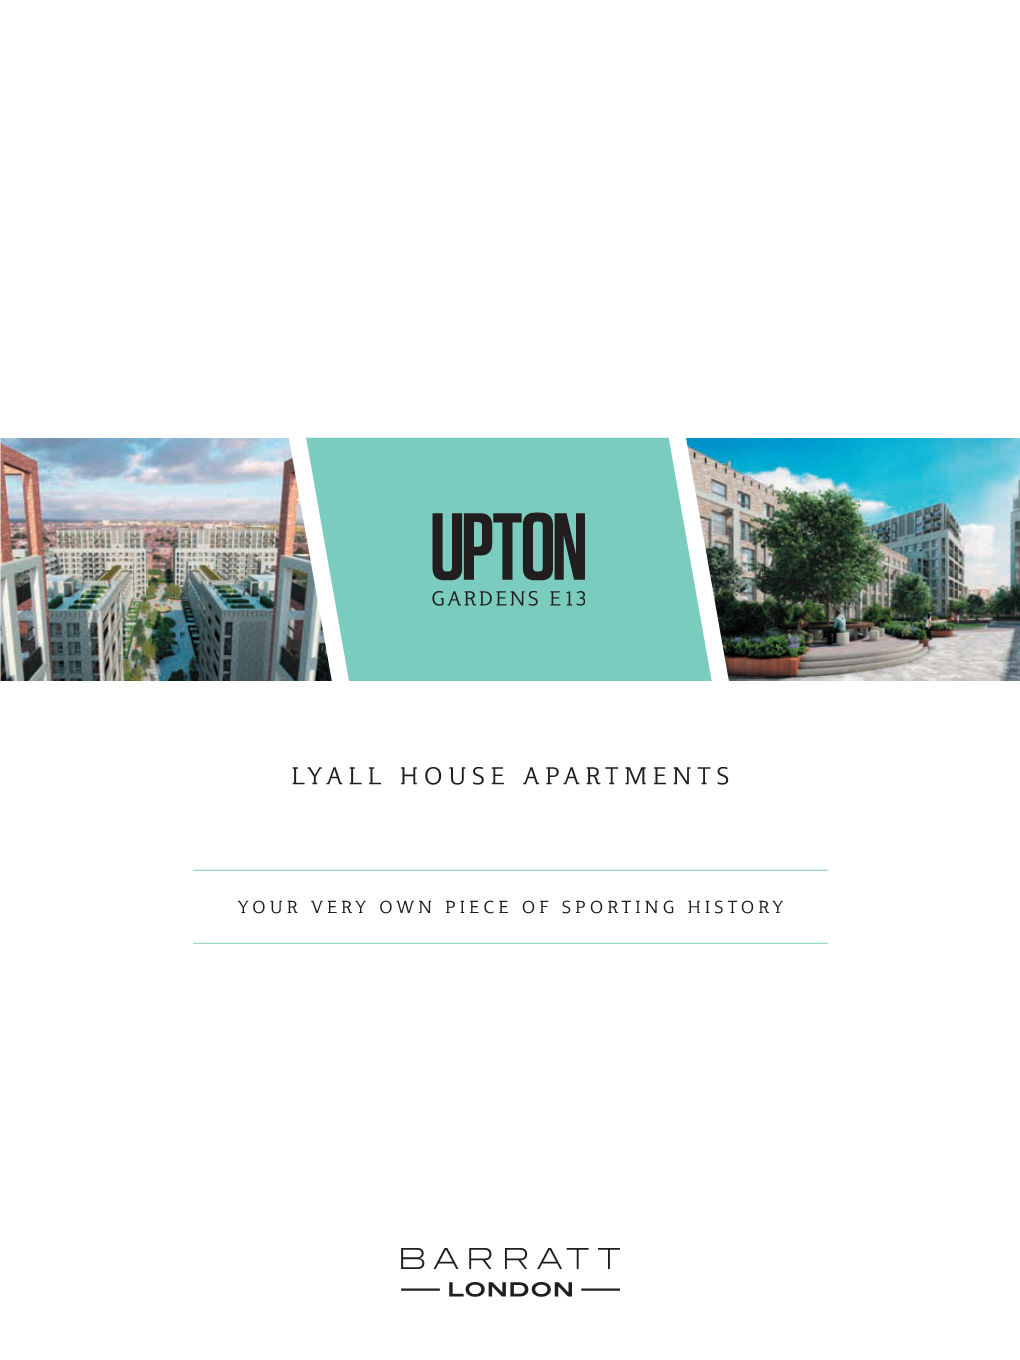 Lyall House Apartments